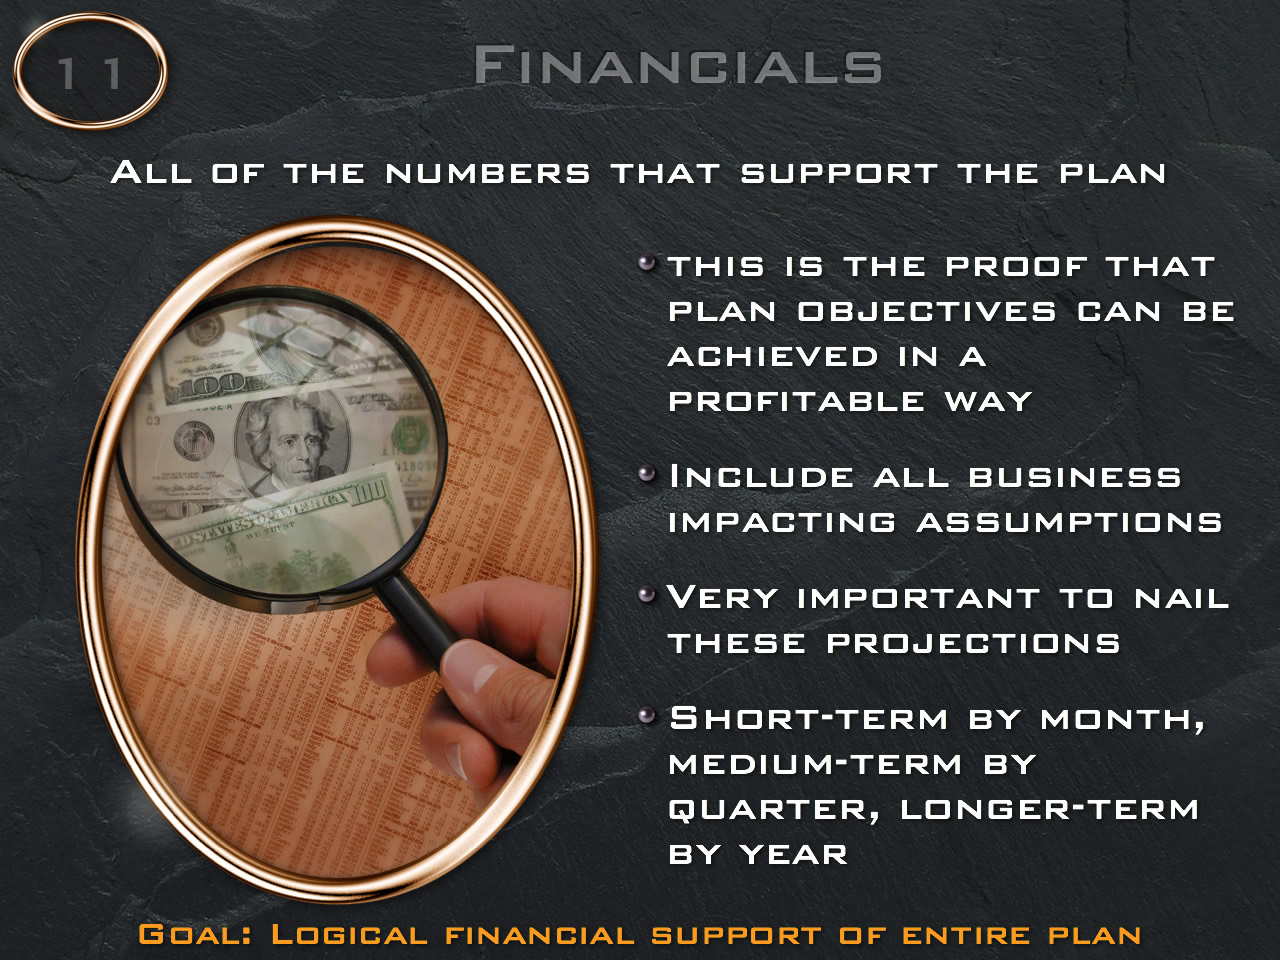 Summarizing the financials that will back the plan and how the plan will yield financials from marketing and sales